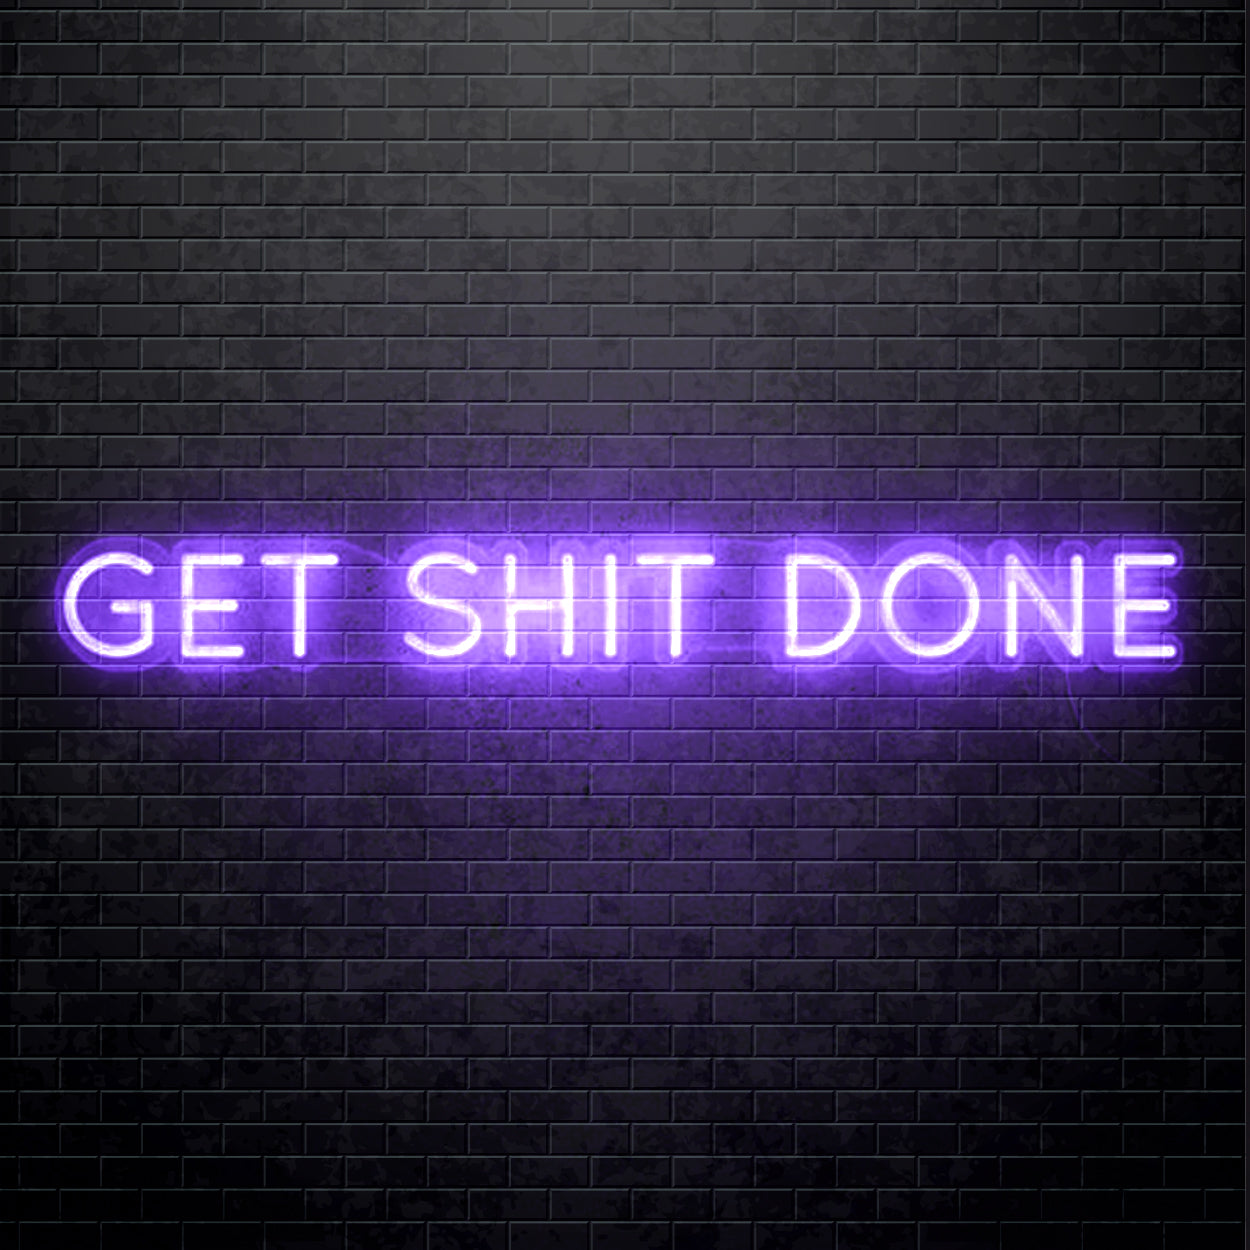 LED Neon sign - GET SHIT DONE